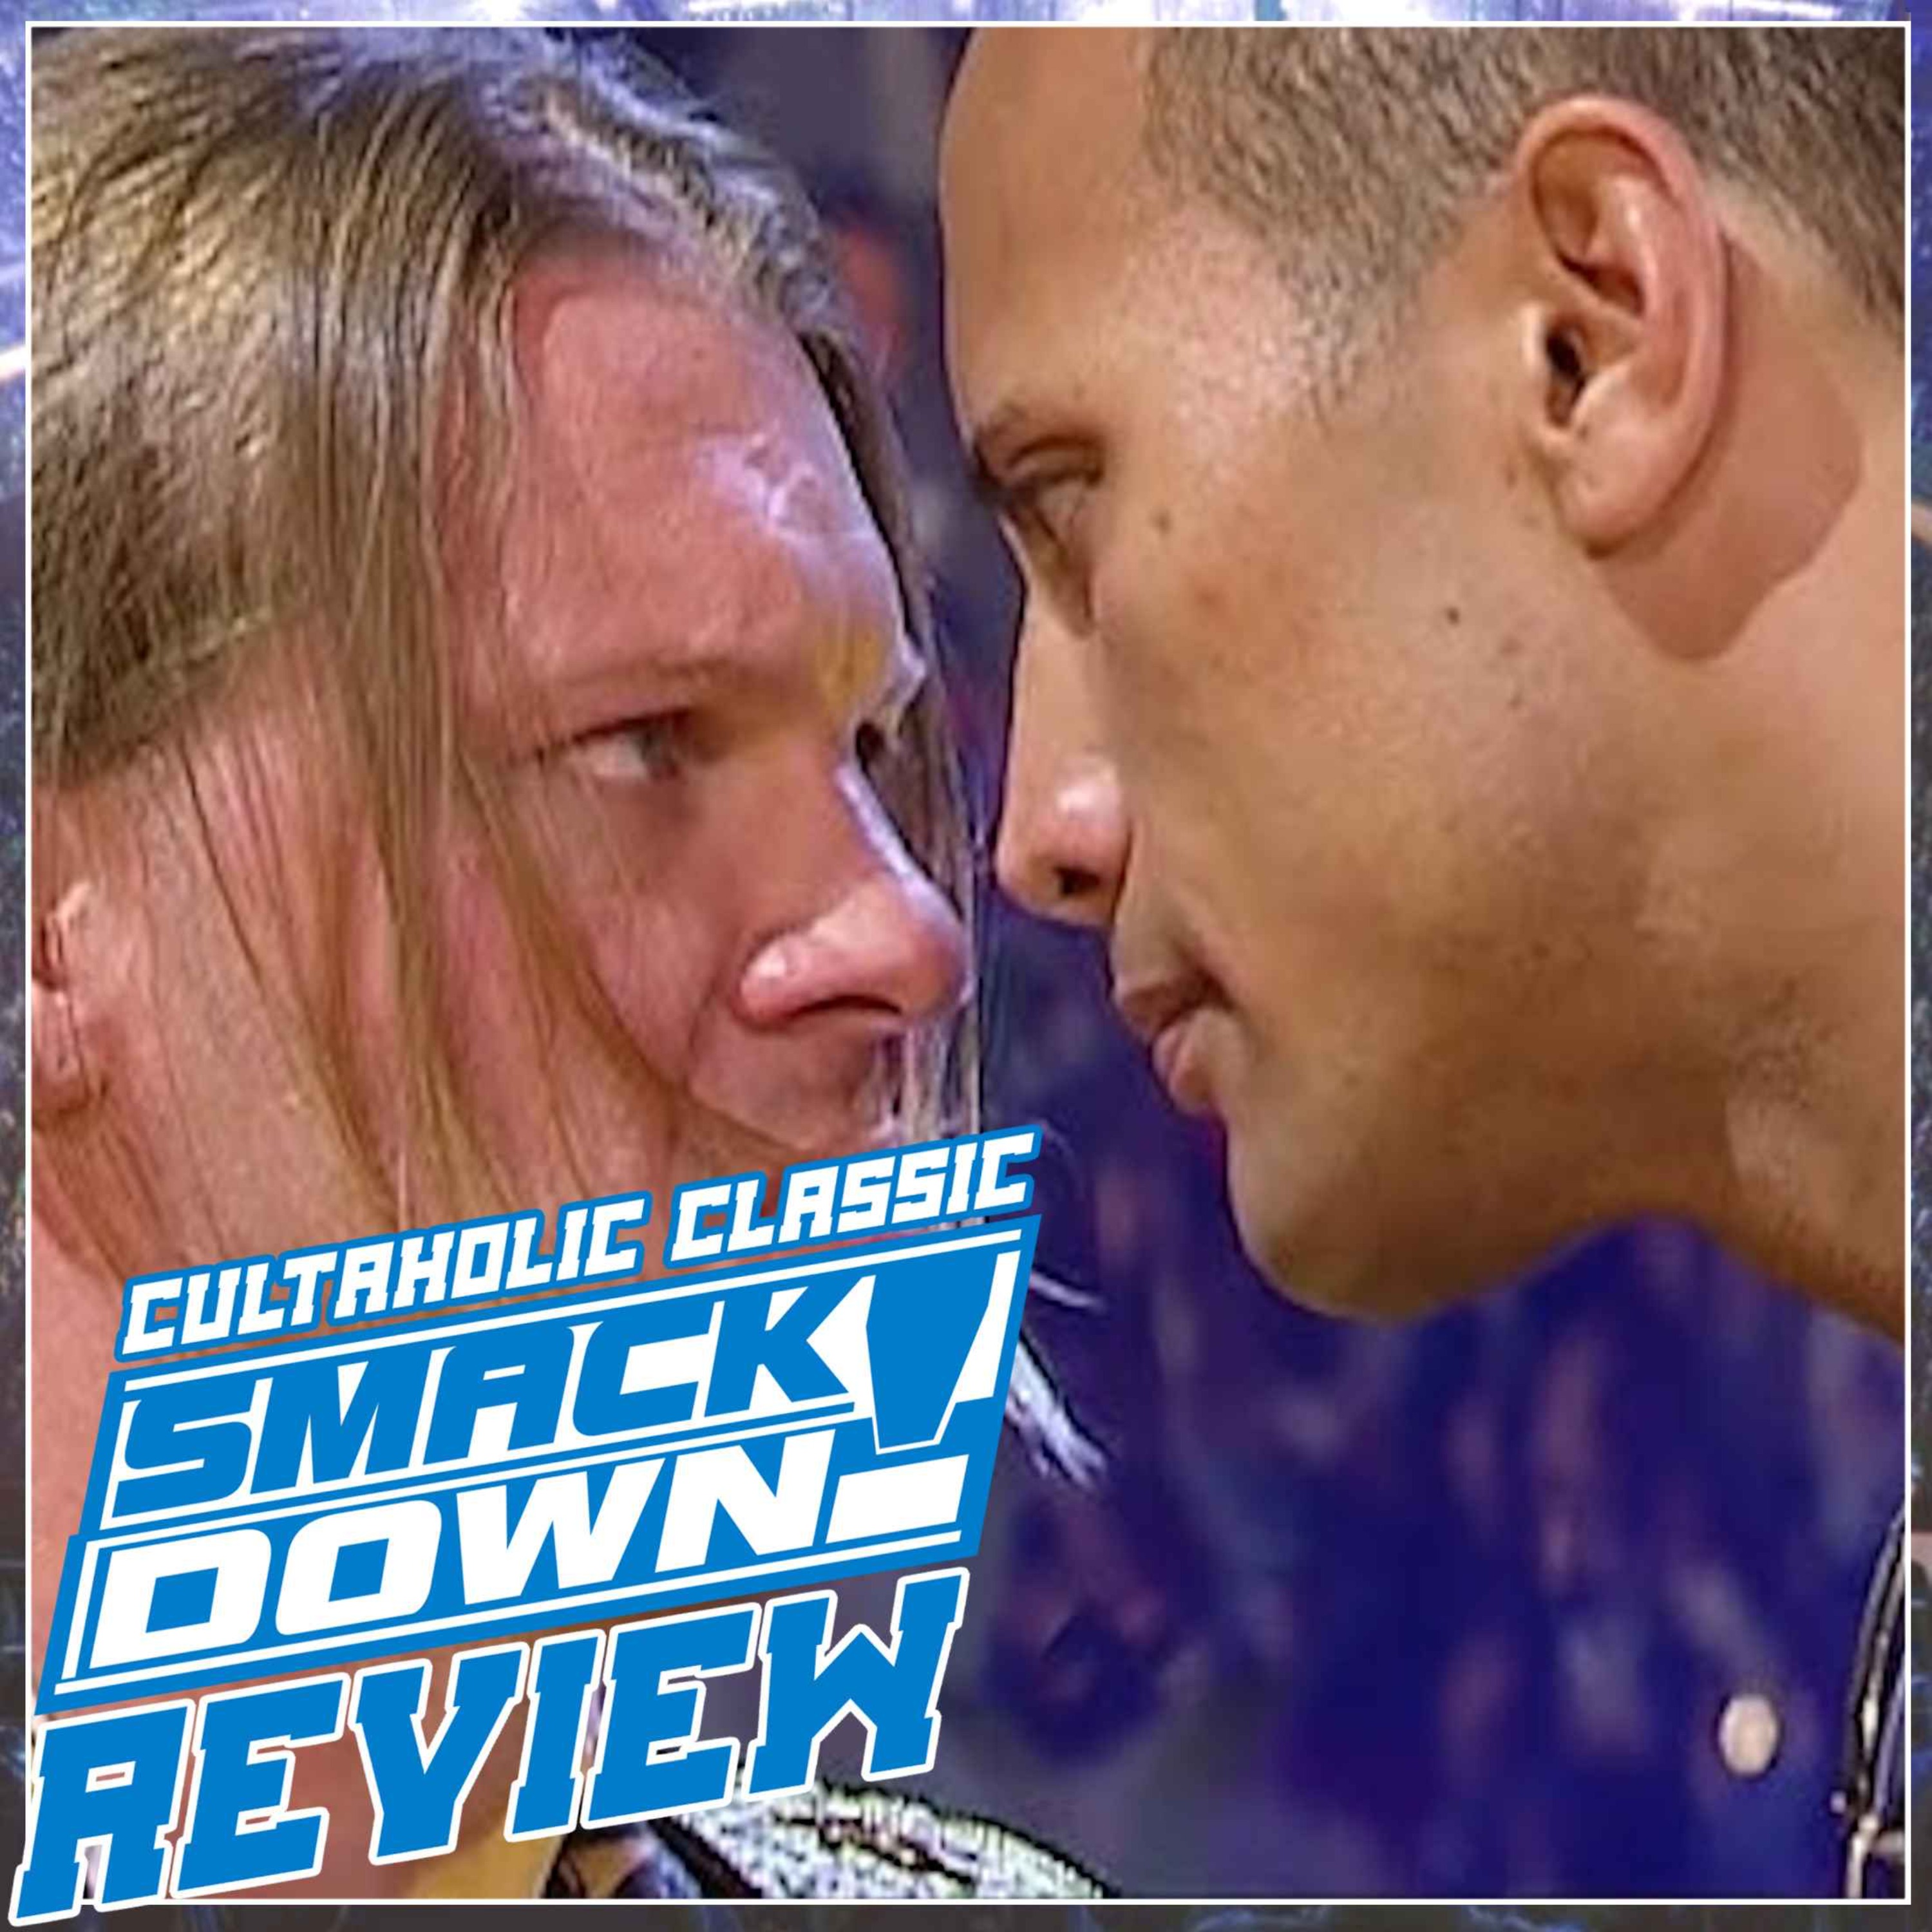 WWE SmackDown #127: Royal Rumble 2002 Go-Home, Triple H's In-Ring Return | CULTAHOLIC CLASSIC SMACKDOWN REVIEW